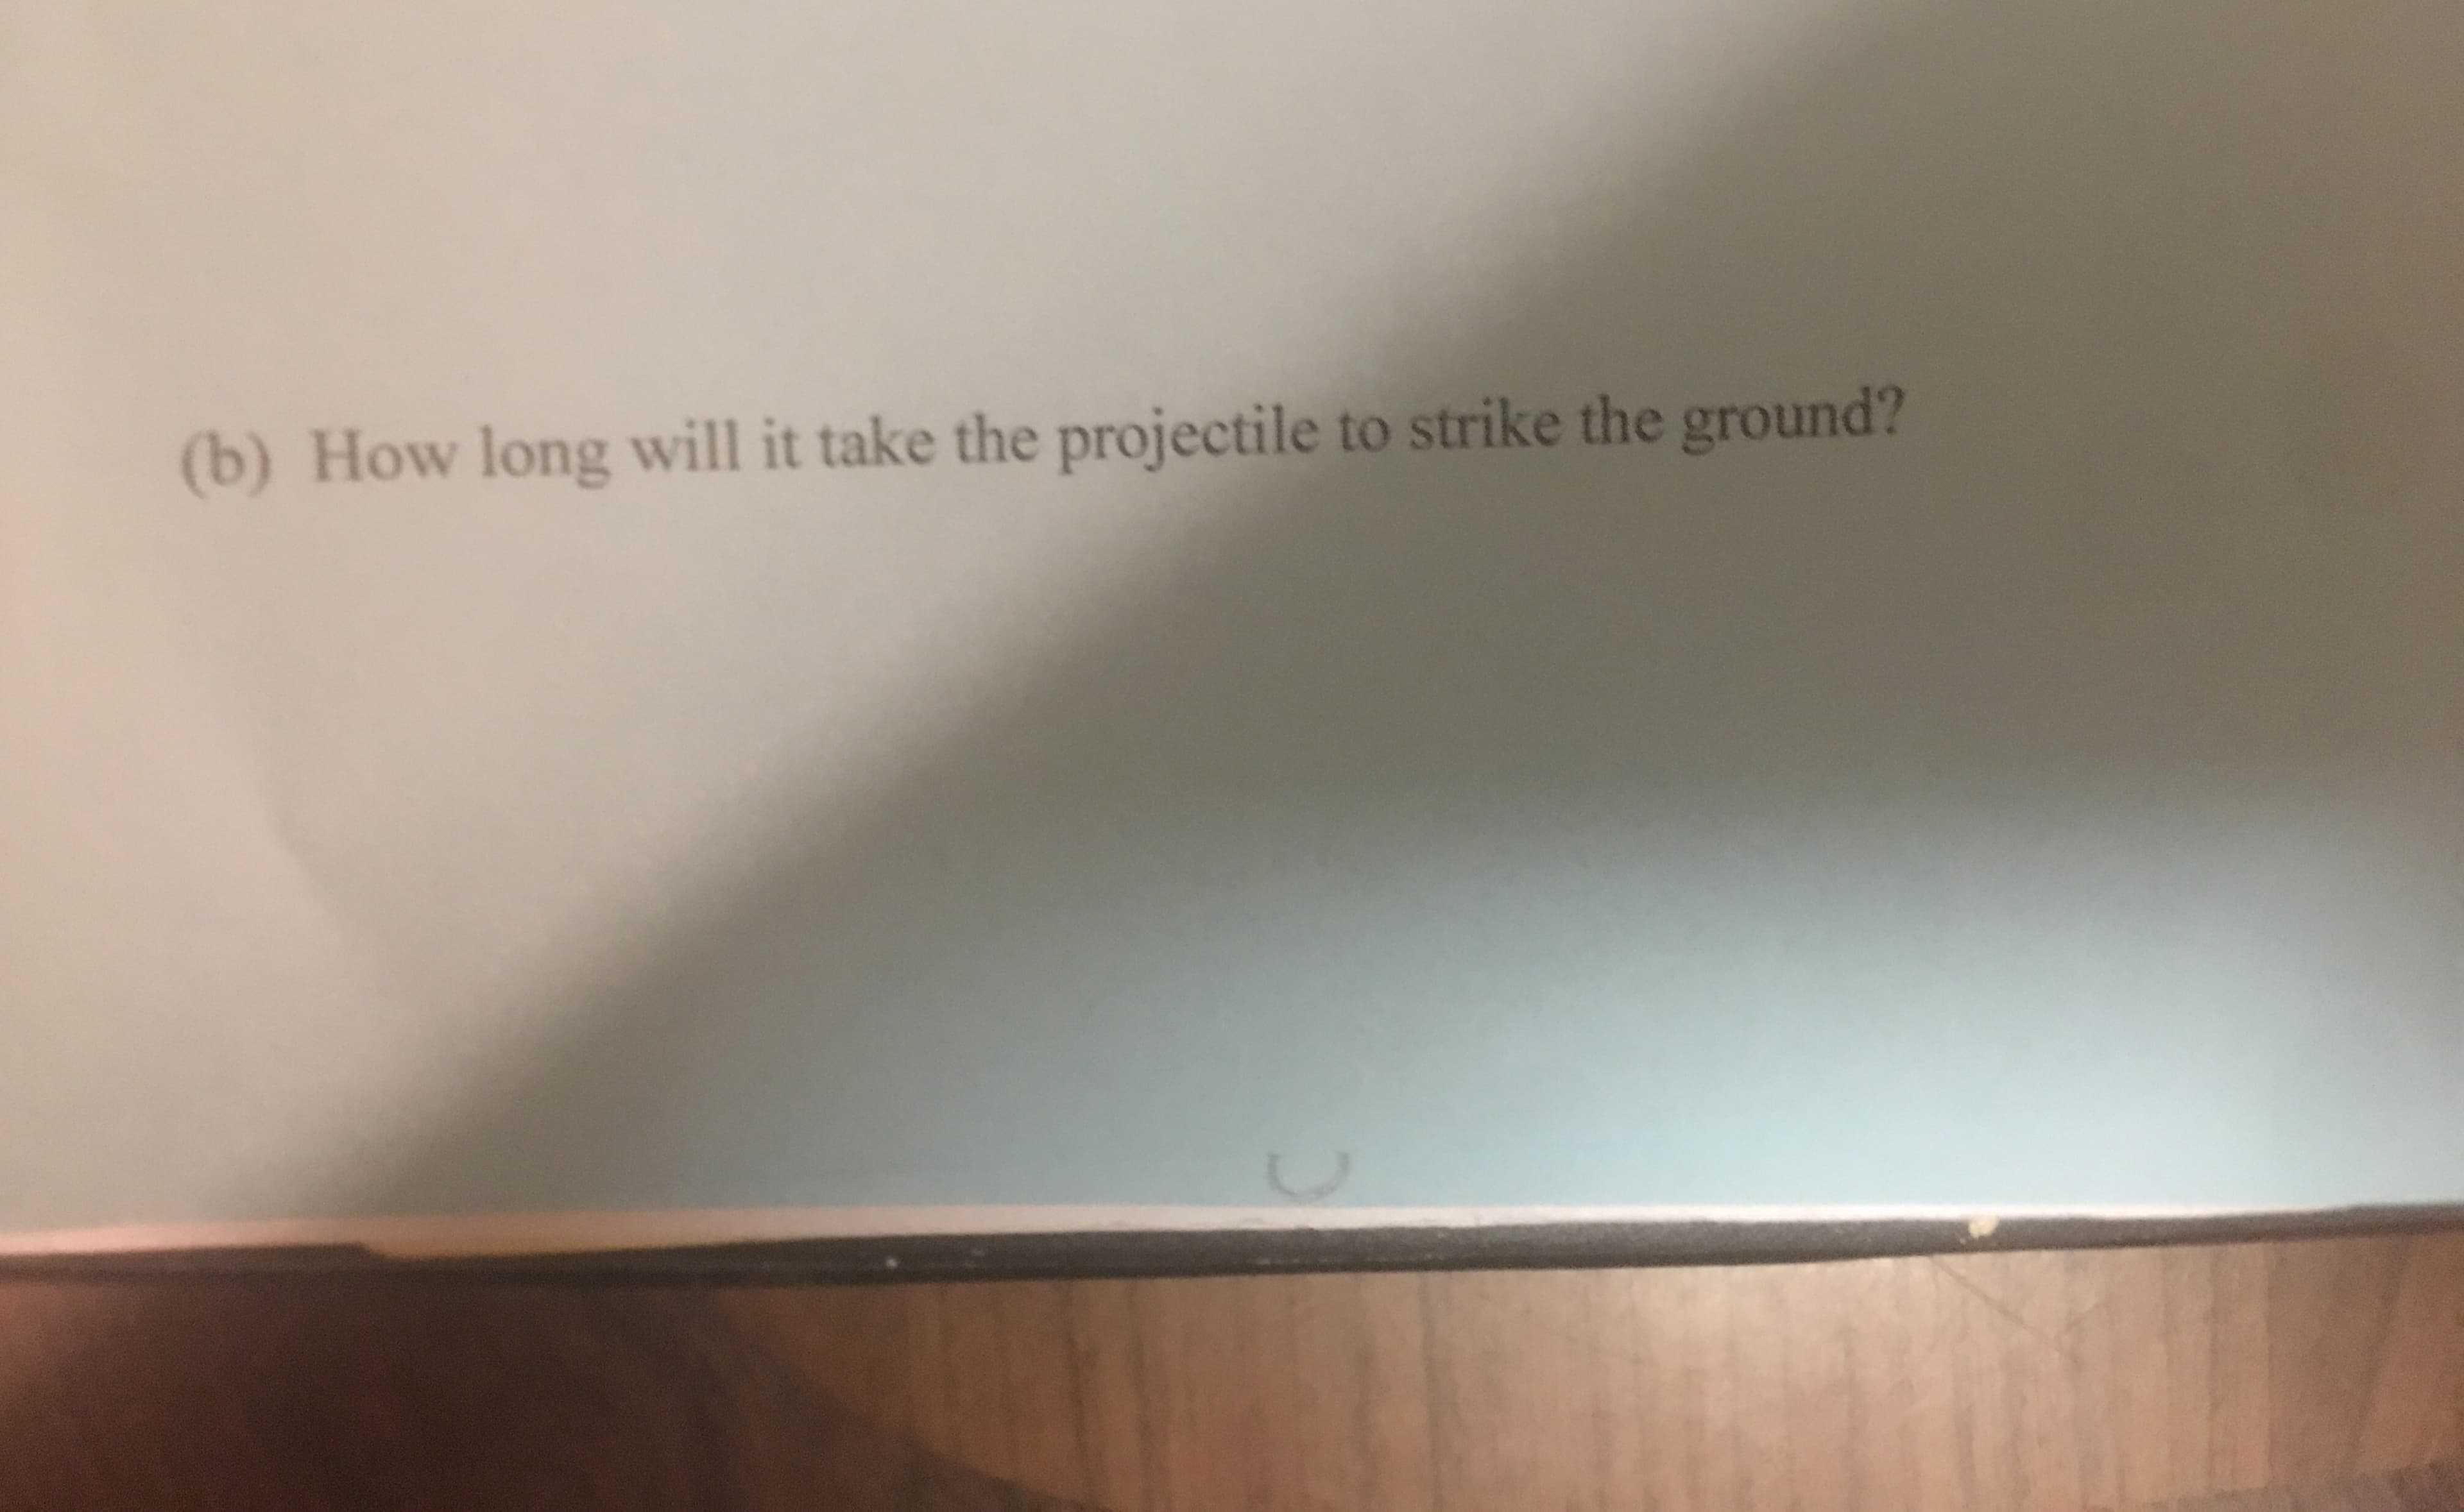 (b) How long will it take the projectile to strike the ground?
